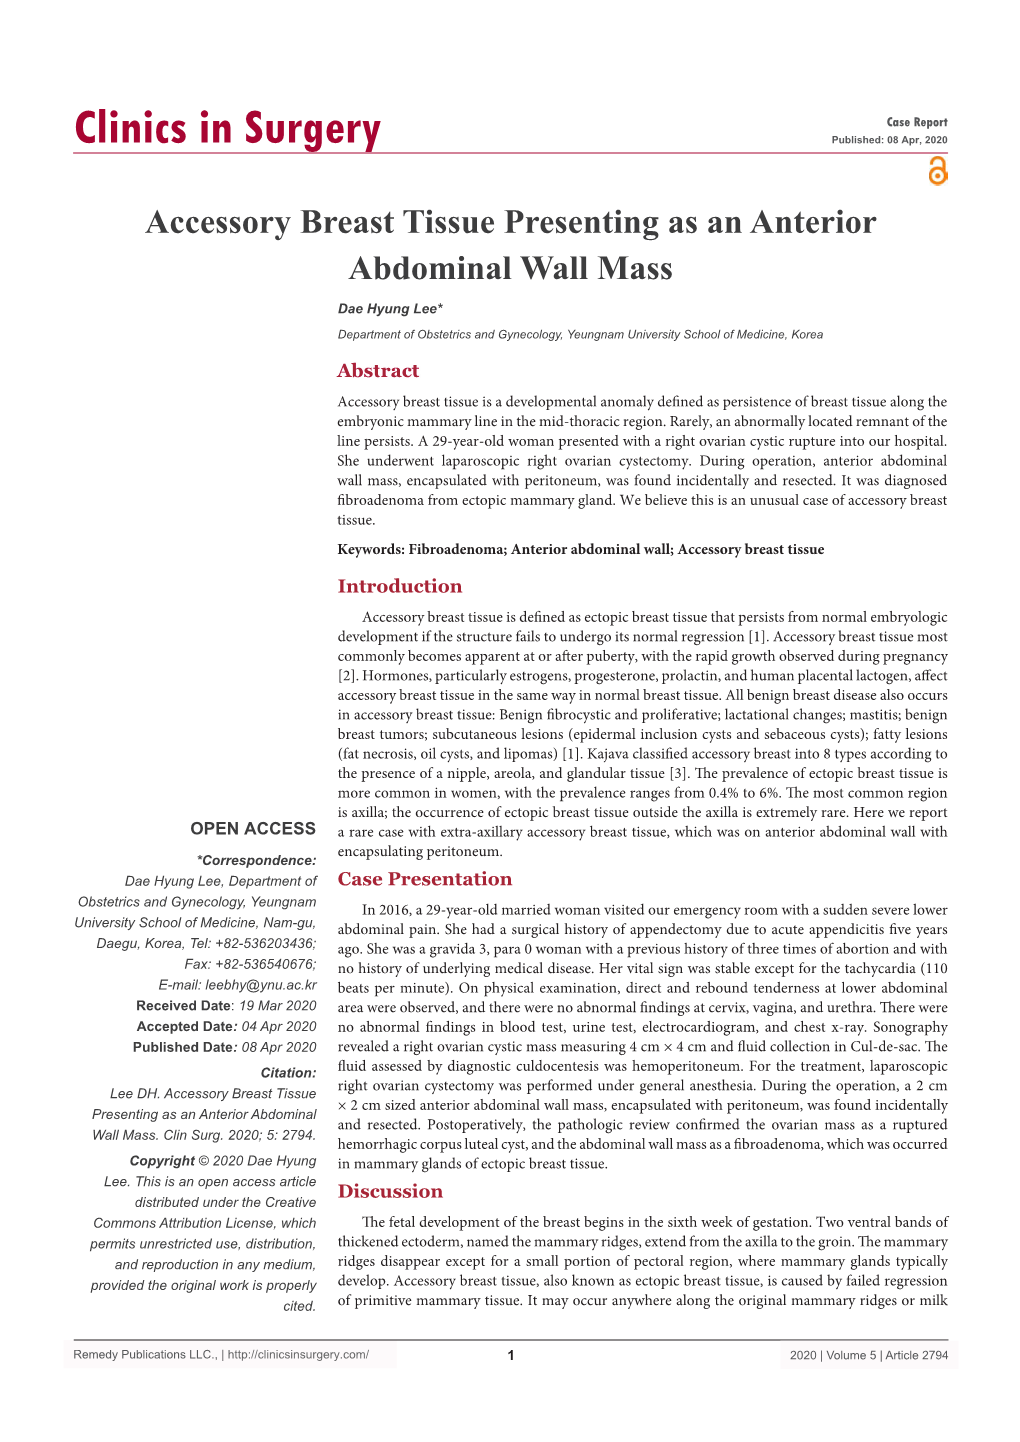 Accessory Breast Tissue Presenting As an Anterior Abdominal Wall Mass